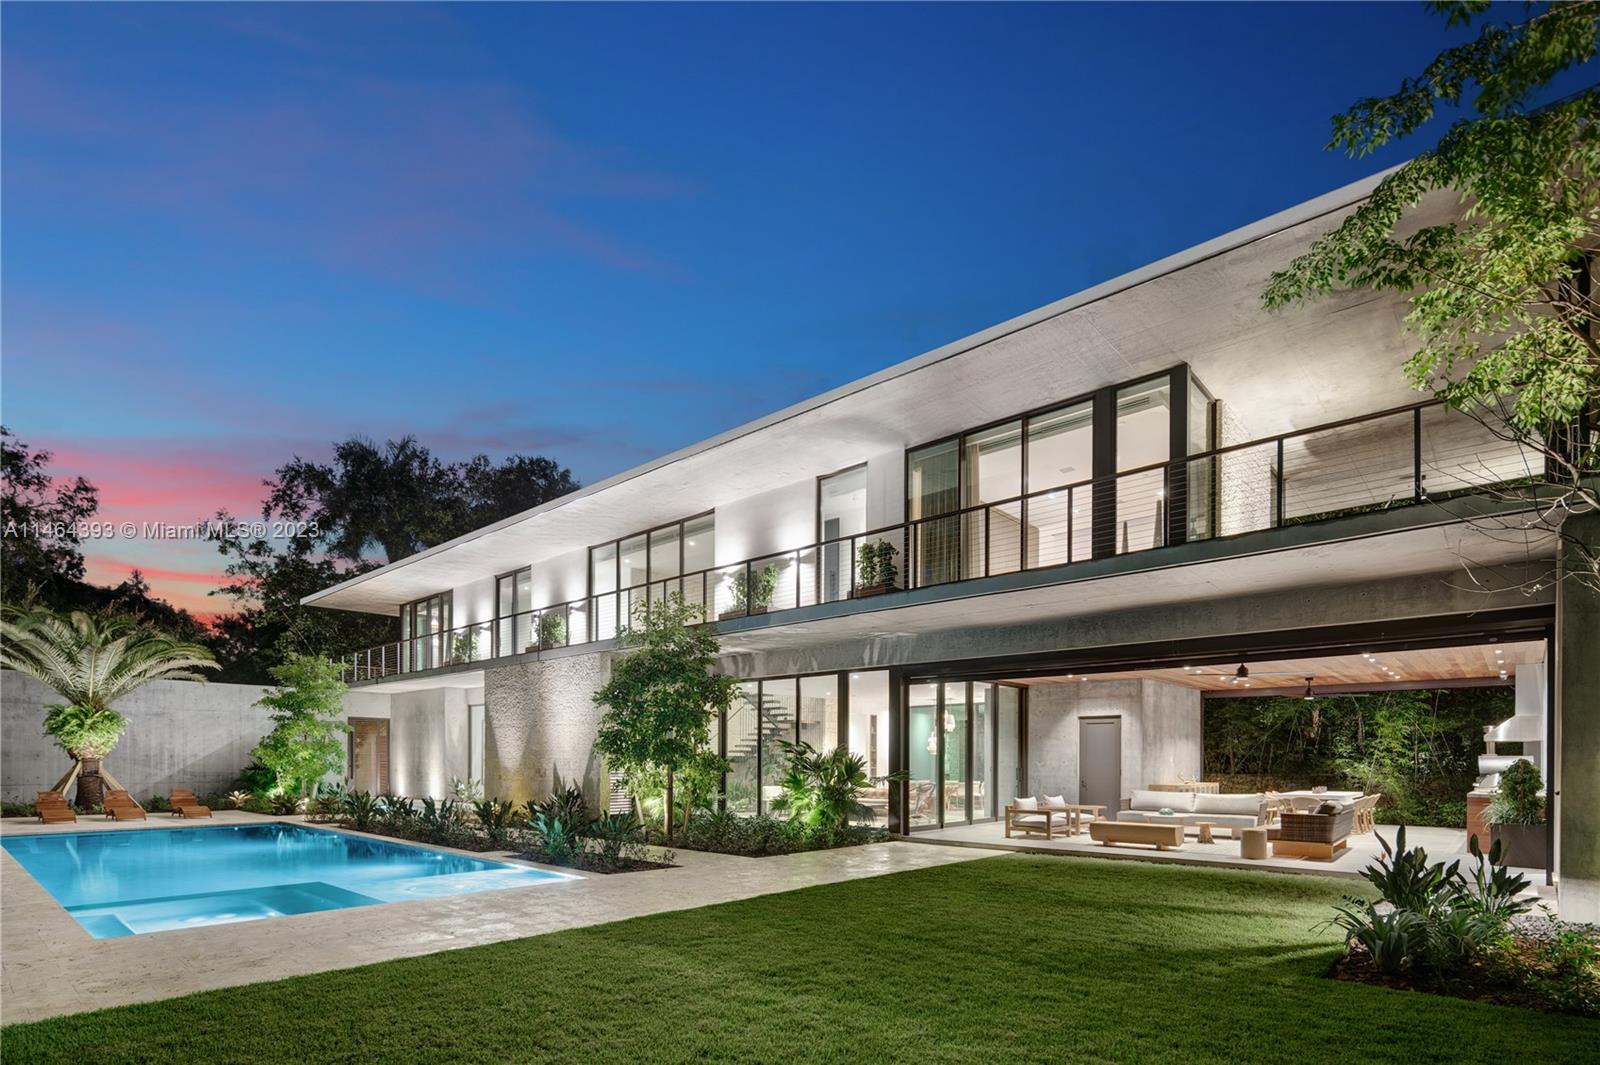 Welcome to a tropical paradise located in the exclusive Ye Little Wood gated enclave in Coconut Grove. This masterpiece of modern luxury, designed by [STRANG] Design, is a newly constructed 7500 sf 2 story, resting on a 21,600 sf Oasis. The home features 6 bd, 5.5 ba, kitchen by Designspace, ensuite guest bedrooms, private office &amp; detached guest suite. Indulge in ultimate outdoor living with wrap-around balconies, outdoor covered patio with summer kitchen featuring a grill &amp; pizza oven, retracting screen walls, pool &amp; spa. Featuring a full solar panel &amp; battery backup system by Tesla incl. Tesla car charging, Crestron lighting control, Sonos sound, camera security, Impact Glass, weather resistant materials, maids qtrs, workshop, storage, 2-car garage &amp; just minutes to the Village center.